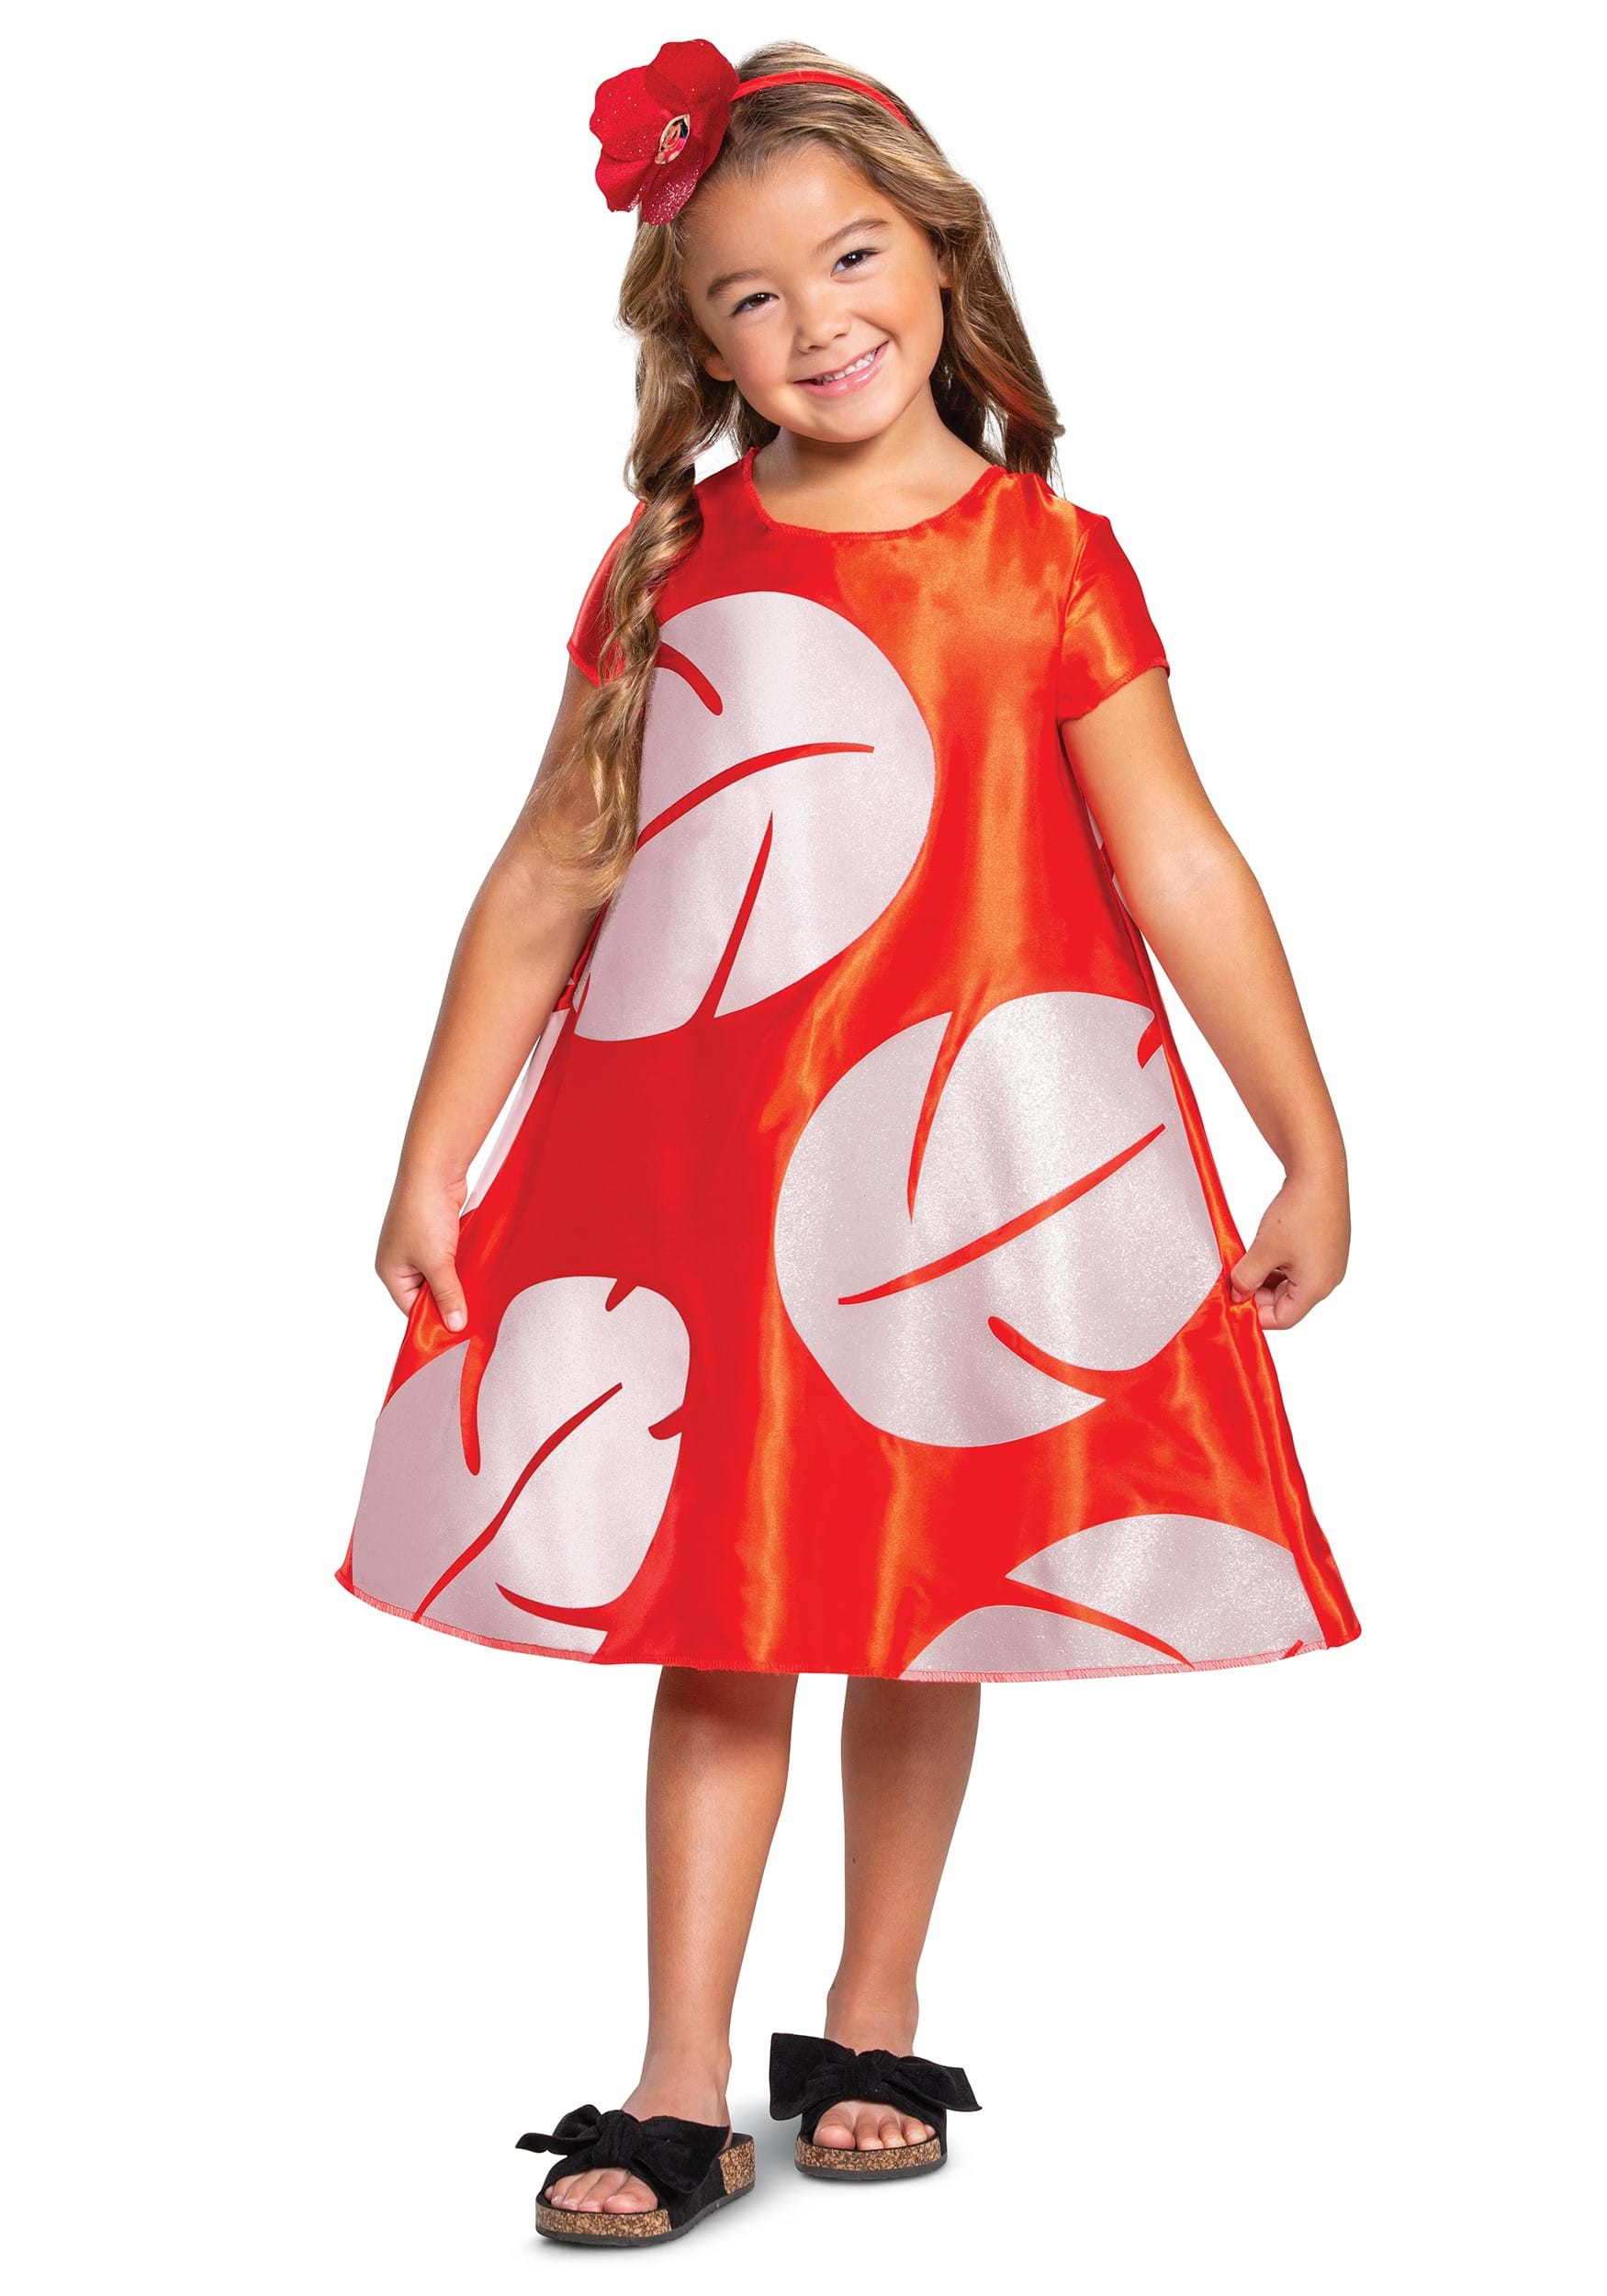 Photos - Fancy Dress Toddler Disguise  Lilo & Stitch Lilo Costume Red/White 